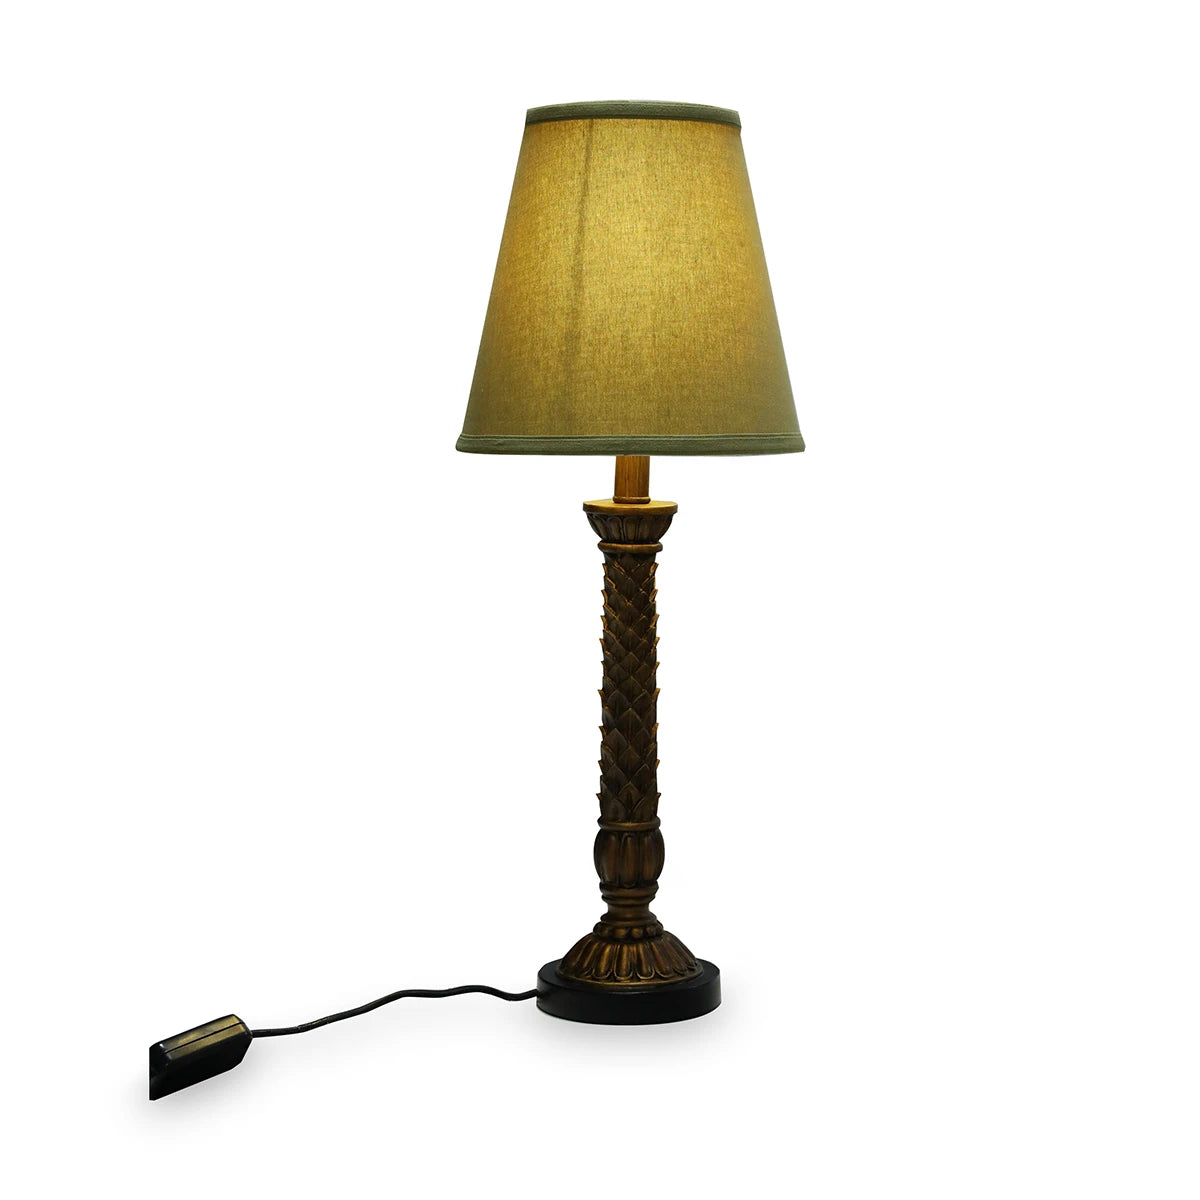 Front View of Brass Pillared Table Lamp with Bulbs on